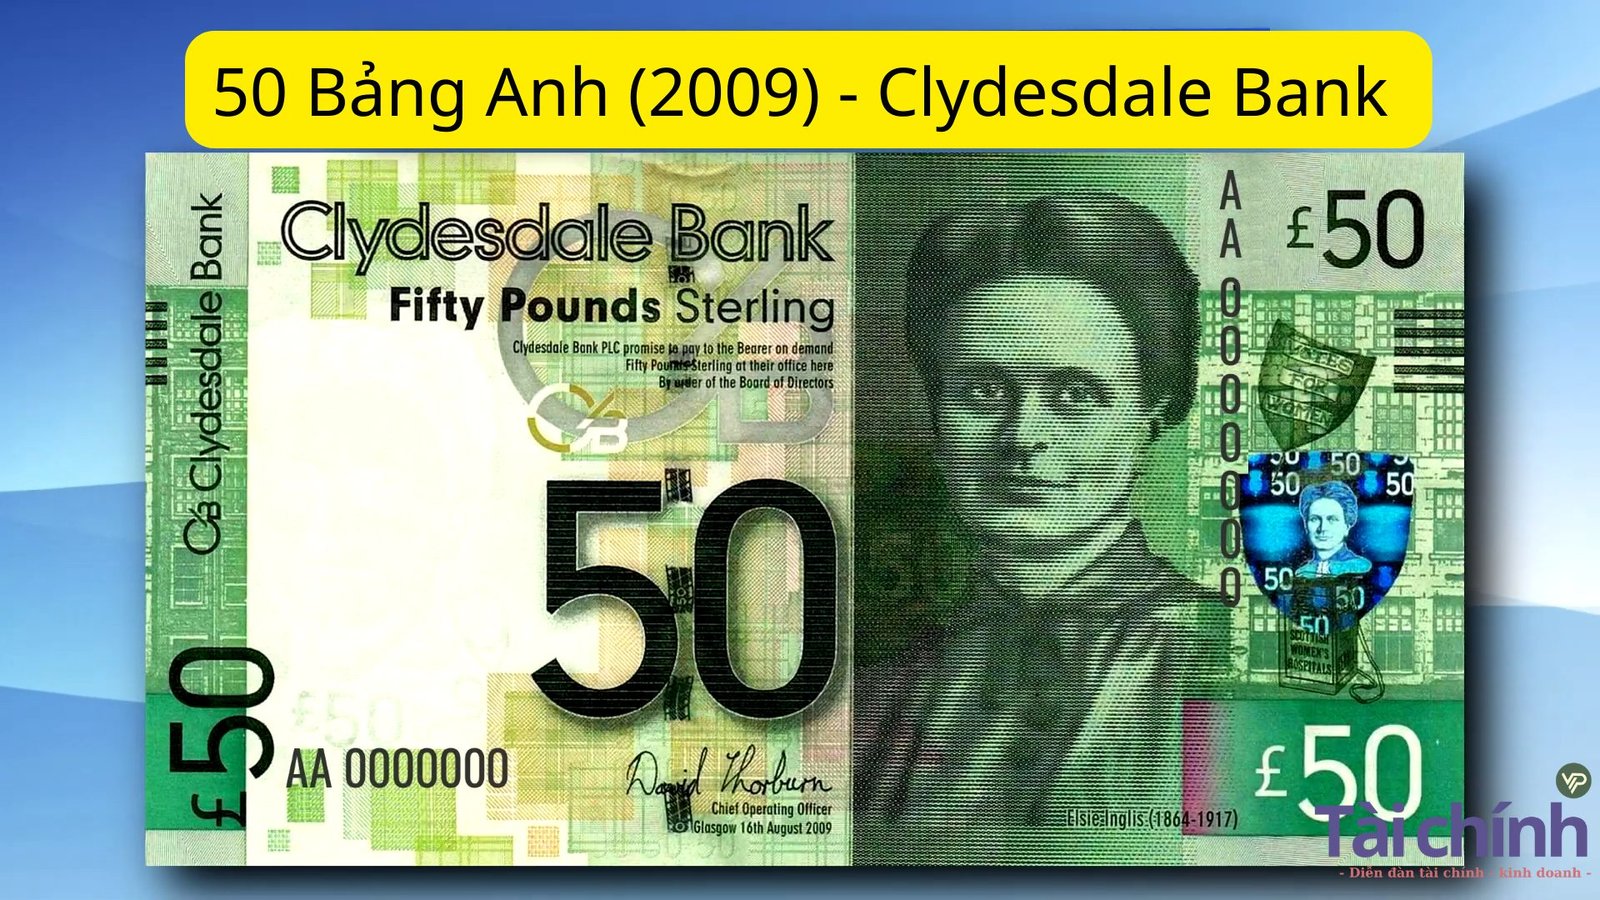 50 Bảng Anh (2009) - Clydesdale Bank